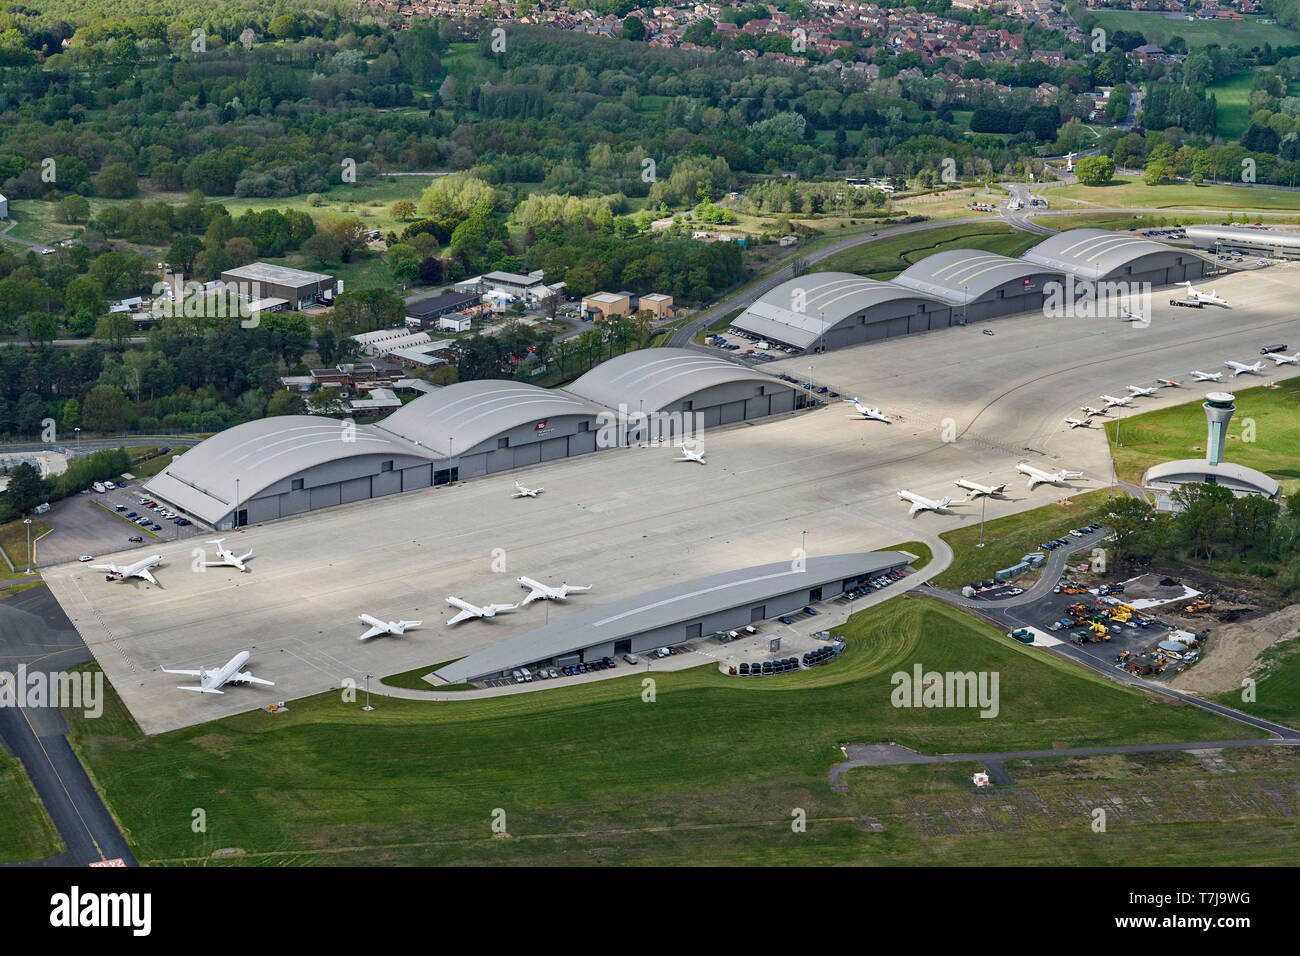 An aerial view of Farnborough Airport, South East England, UK Stock Photo